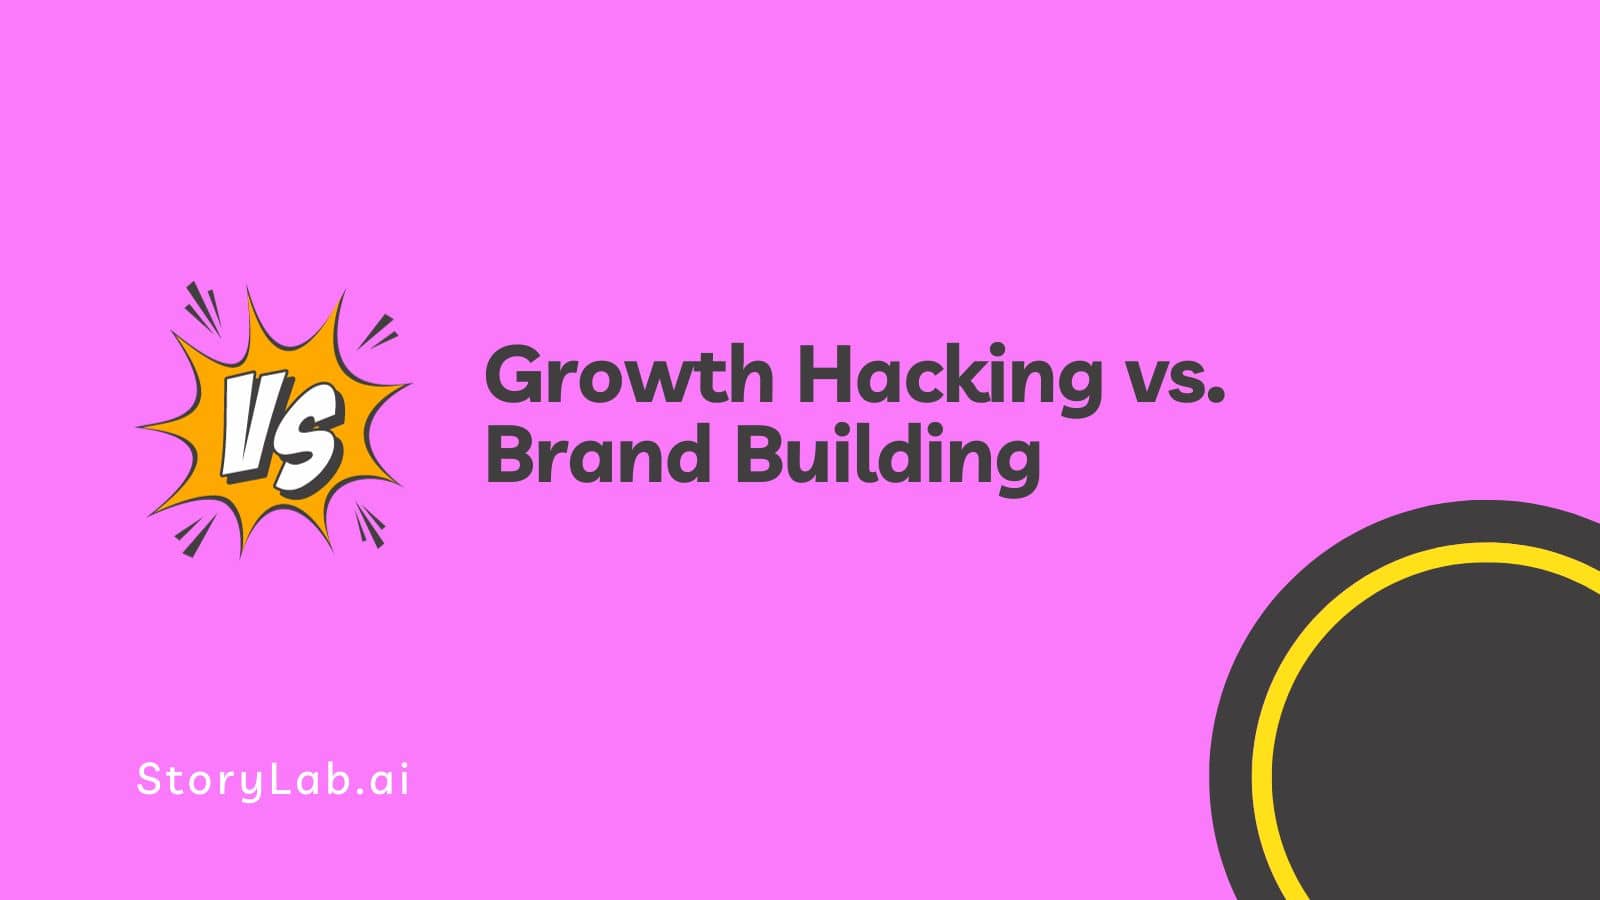 Growth Hacking vs. Brand Building